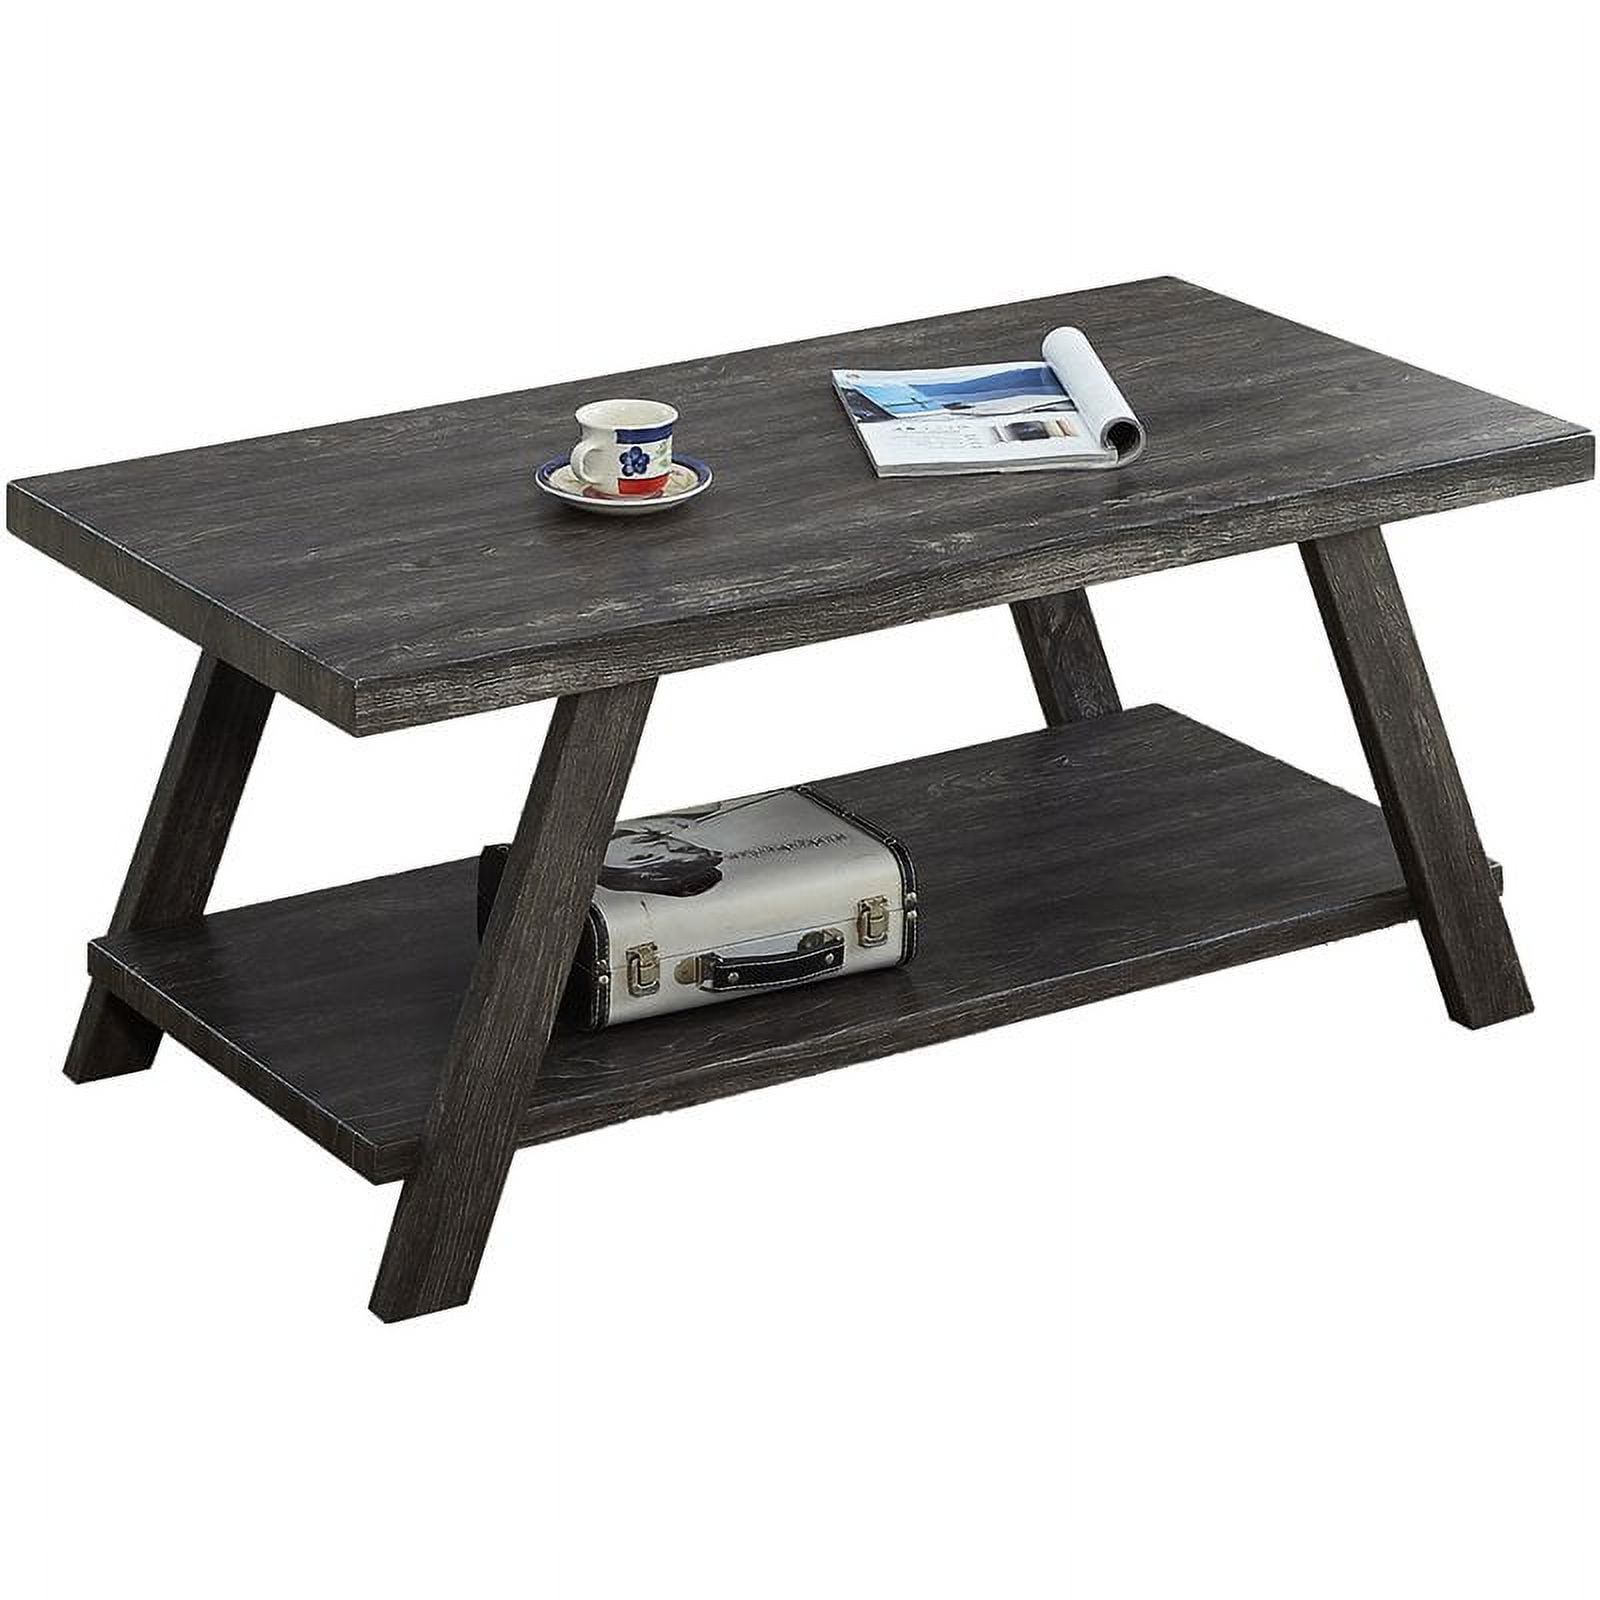 Current Pemberly Row Replicated Wood Coffee Table In Charcoal Finish – Walmart Intended For Pemberly Row Replicated Wood Coffee Tables (Photo 1 of 10)